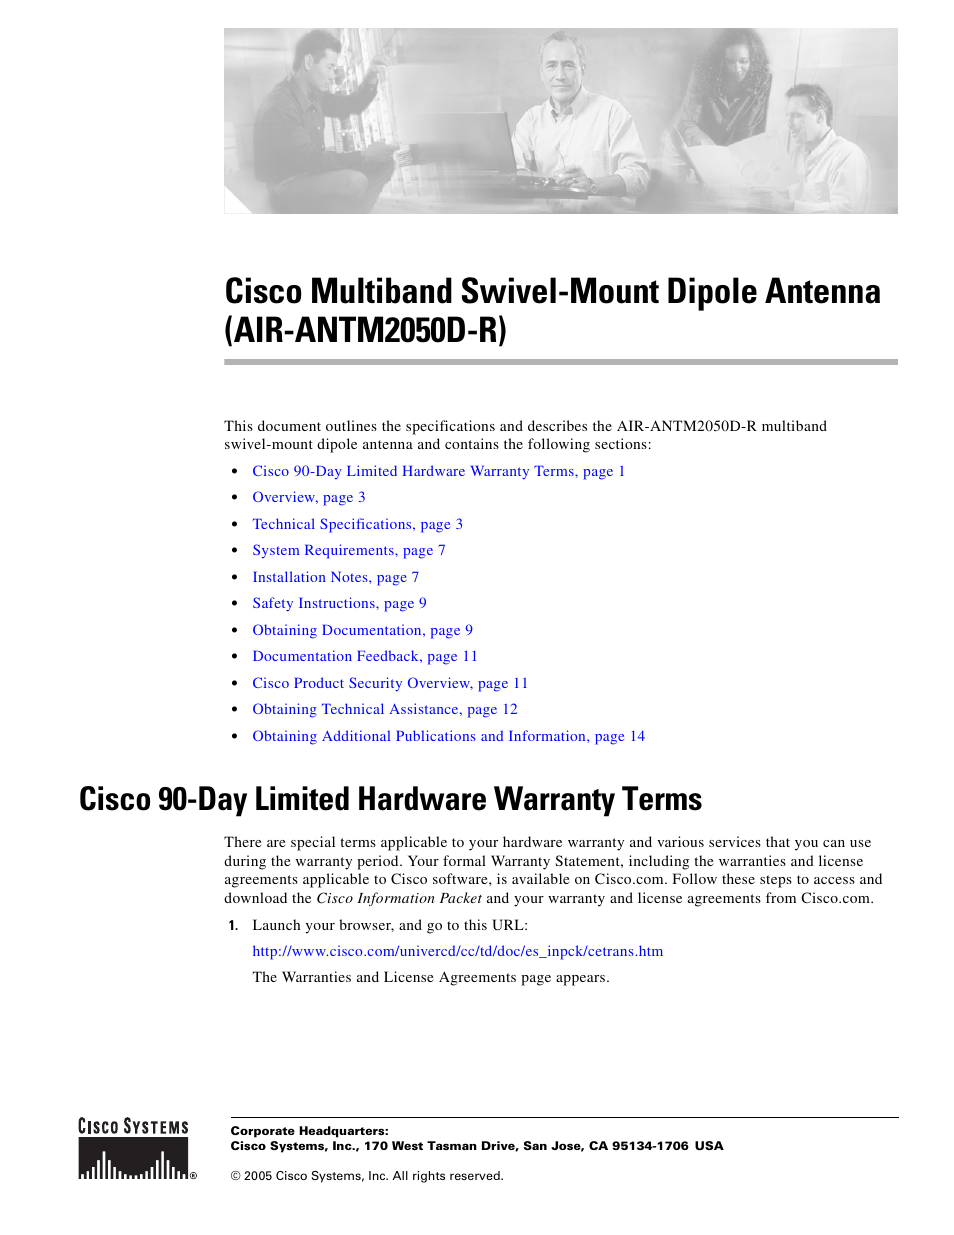 Cisco Multiband Swivel-Mount Dipole Antenna AIR-ANTM2050D-R User Manual | 14 pages